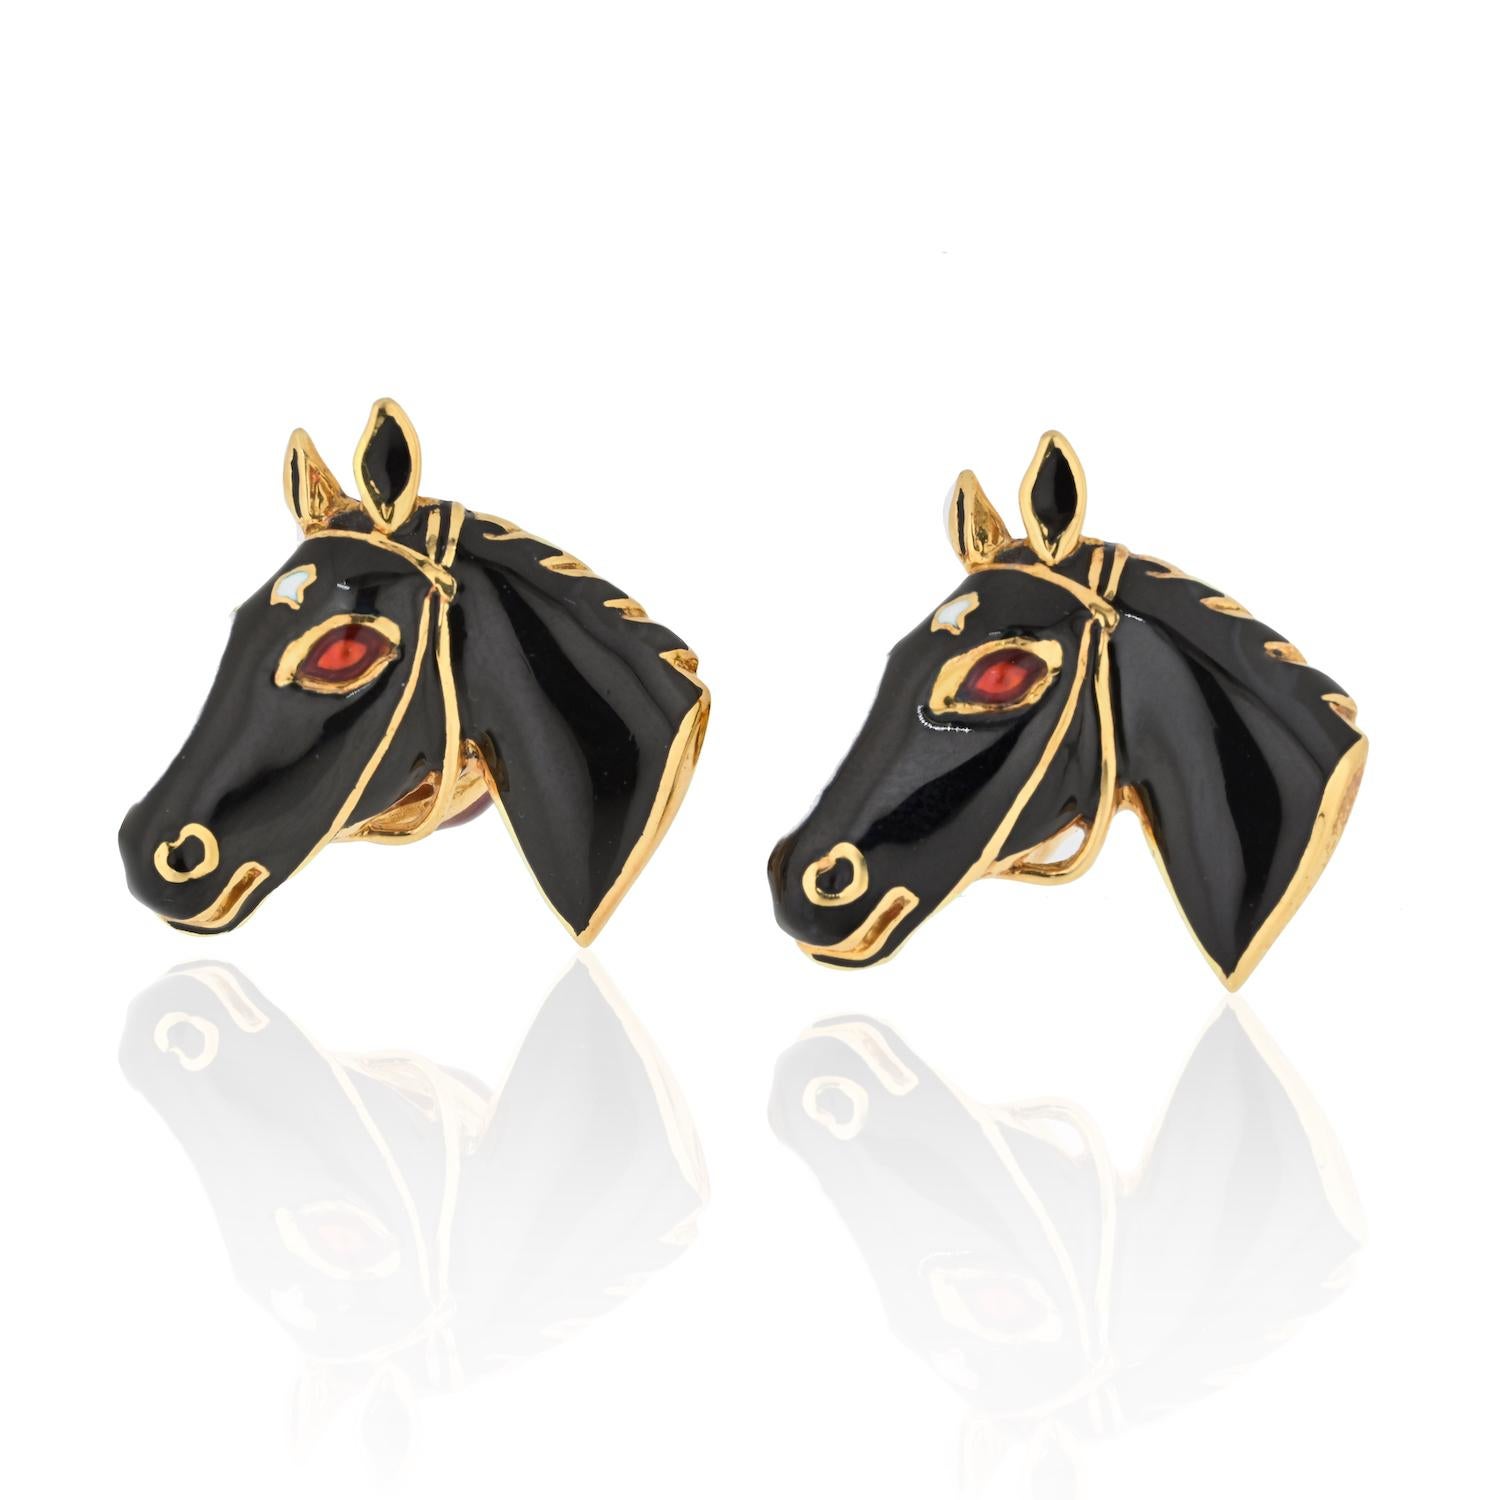 Immerse yourself in the equestrian elegance of the David Webb 18 Karat Yellow Gold Black Enamel Horse Head Cuff Links—a masterpiece of craftsmanship and style. These exquisite cuff links, crafted in 18kt gold, bear the distinctive touch of David